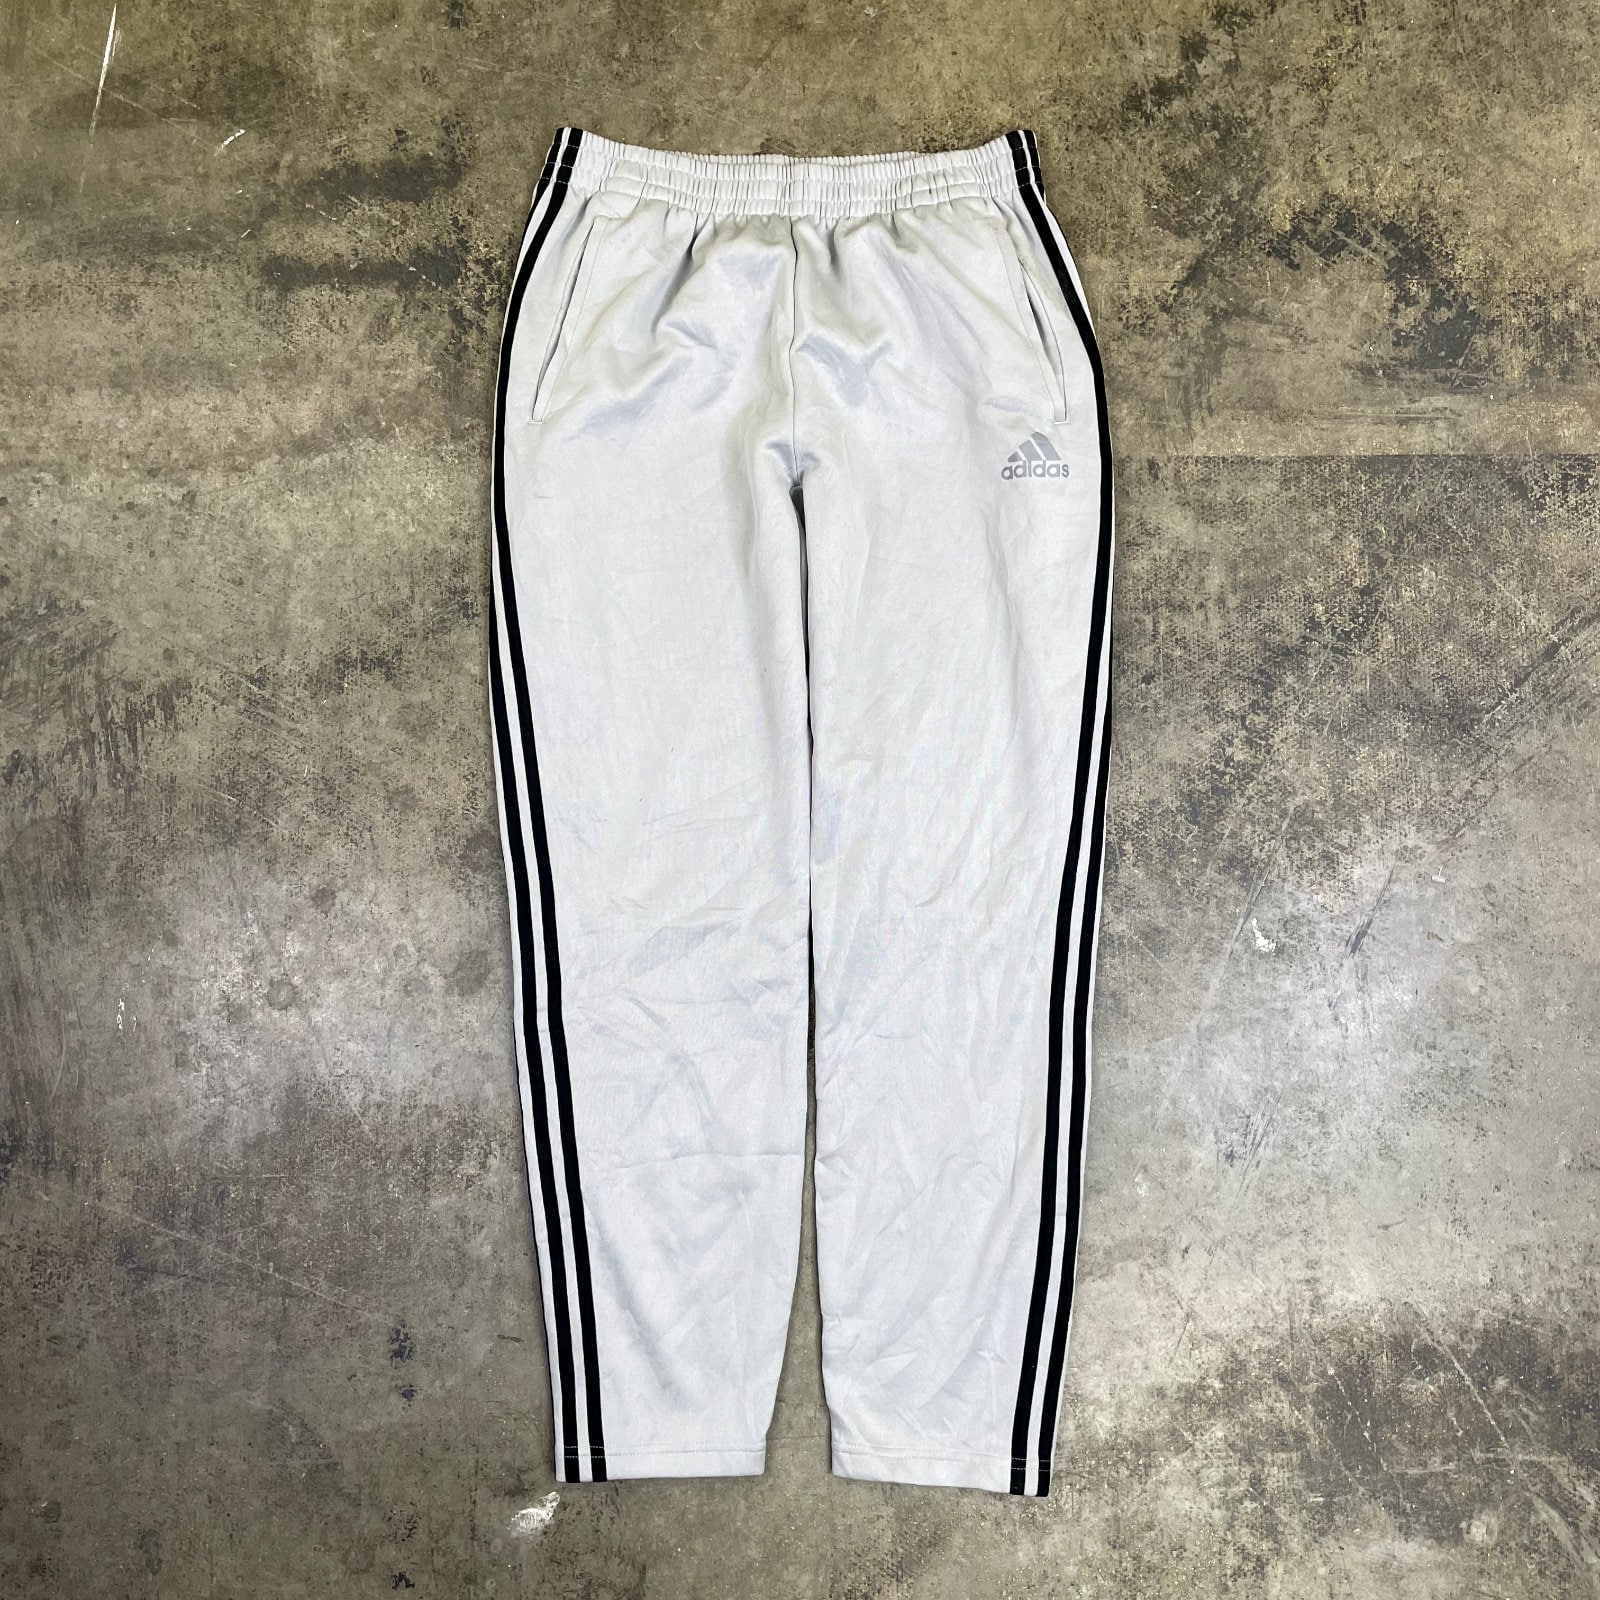 Adidas popper tracksuit bottoms from the 90s are fashionable again and  being sold in Plymouth  Plymouth Live